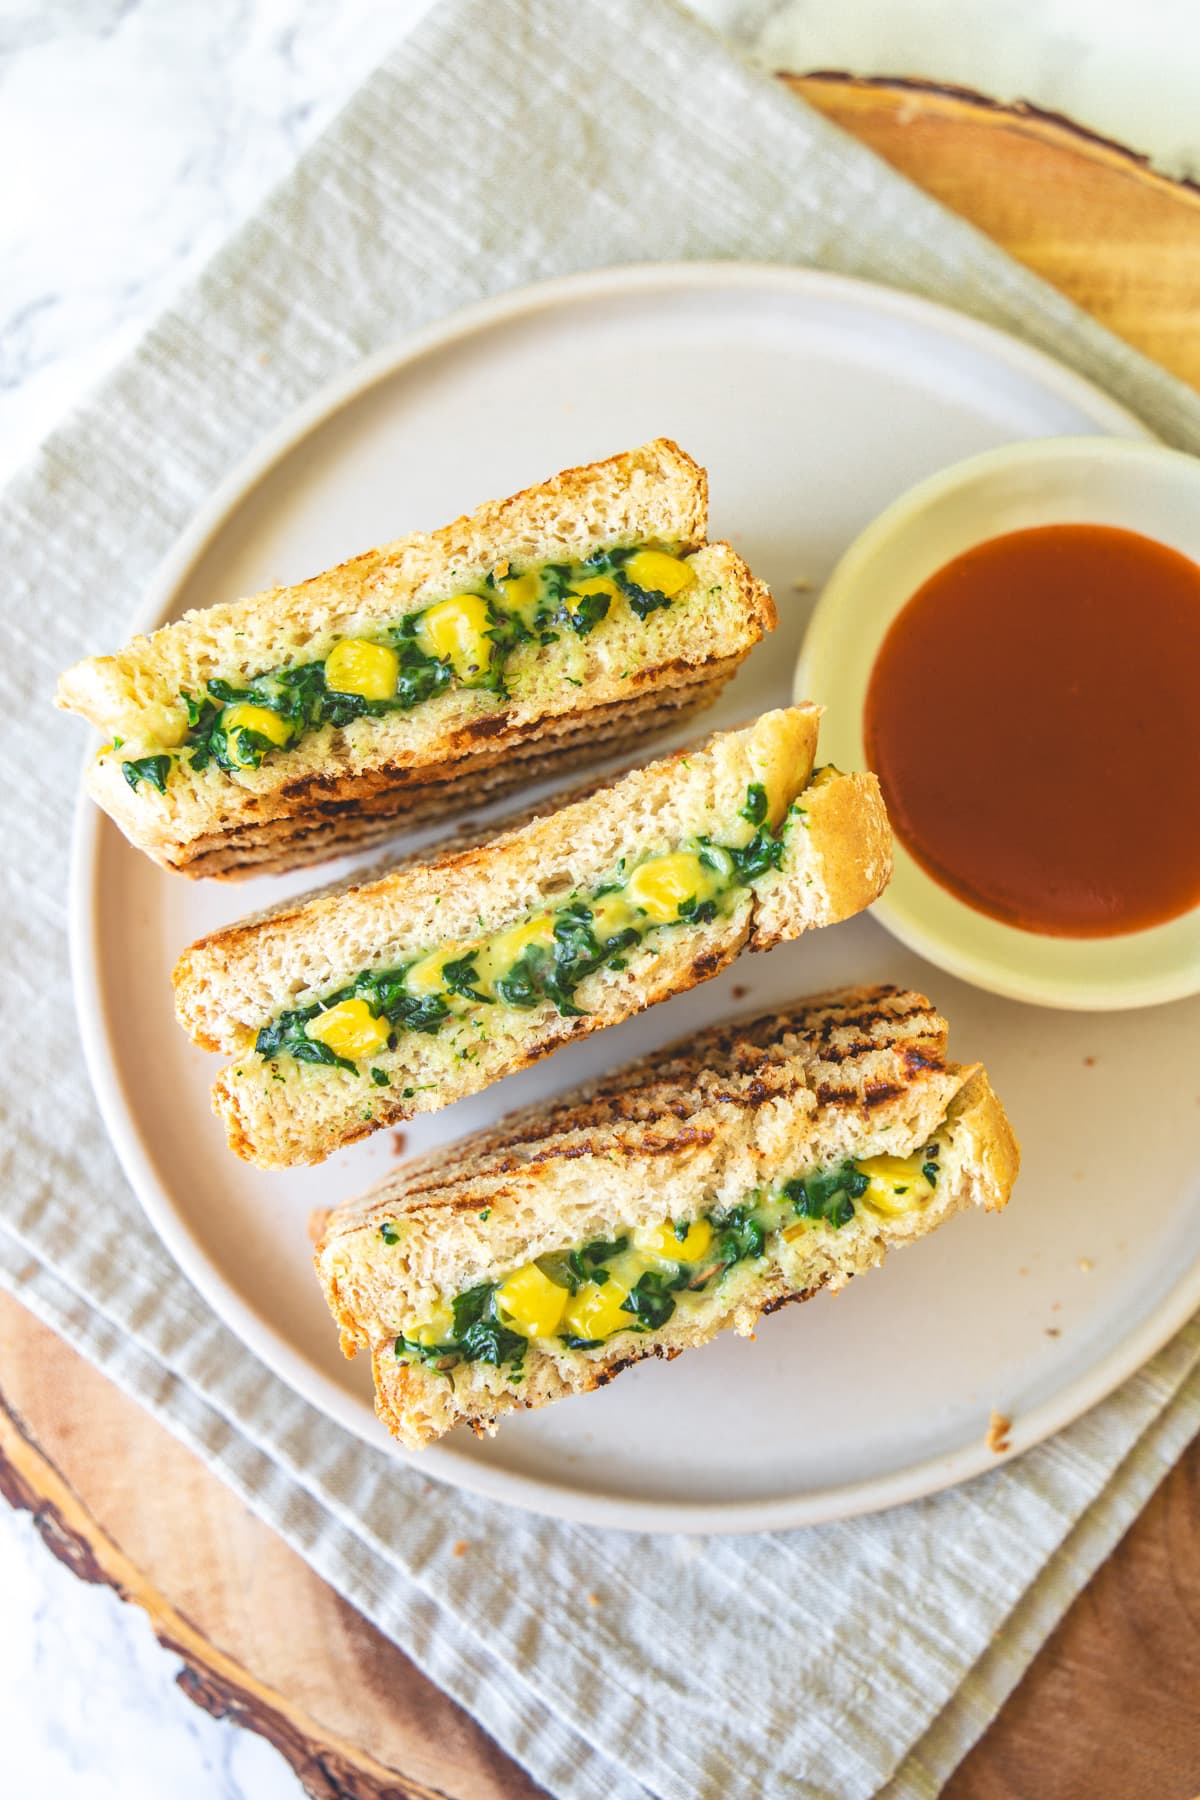 3 pieces of spinach corn sandwich with sweet chili sauce on the side.